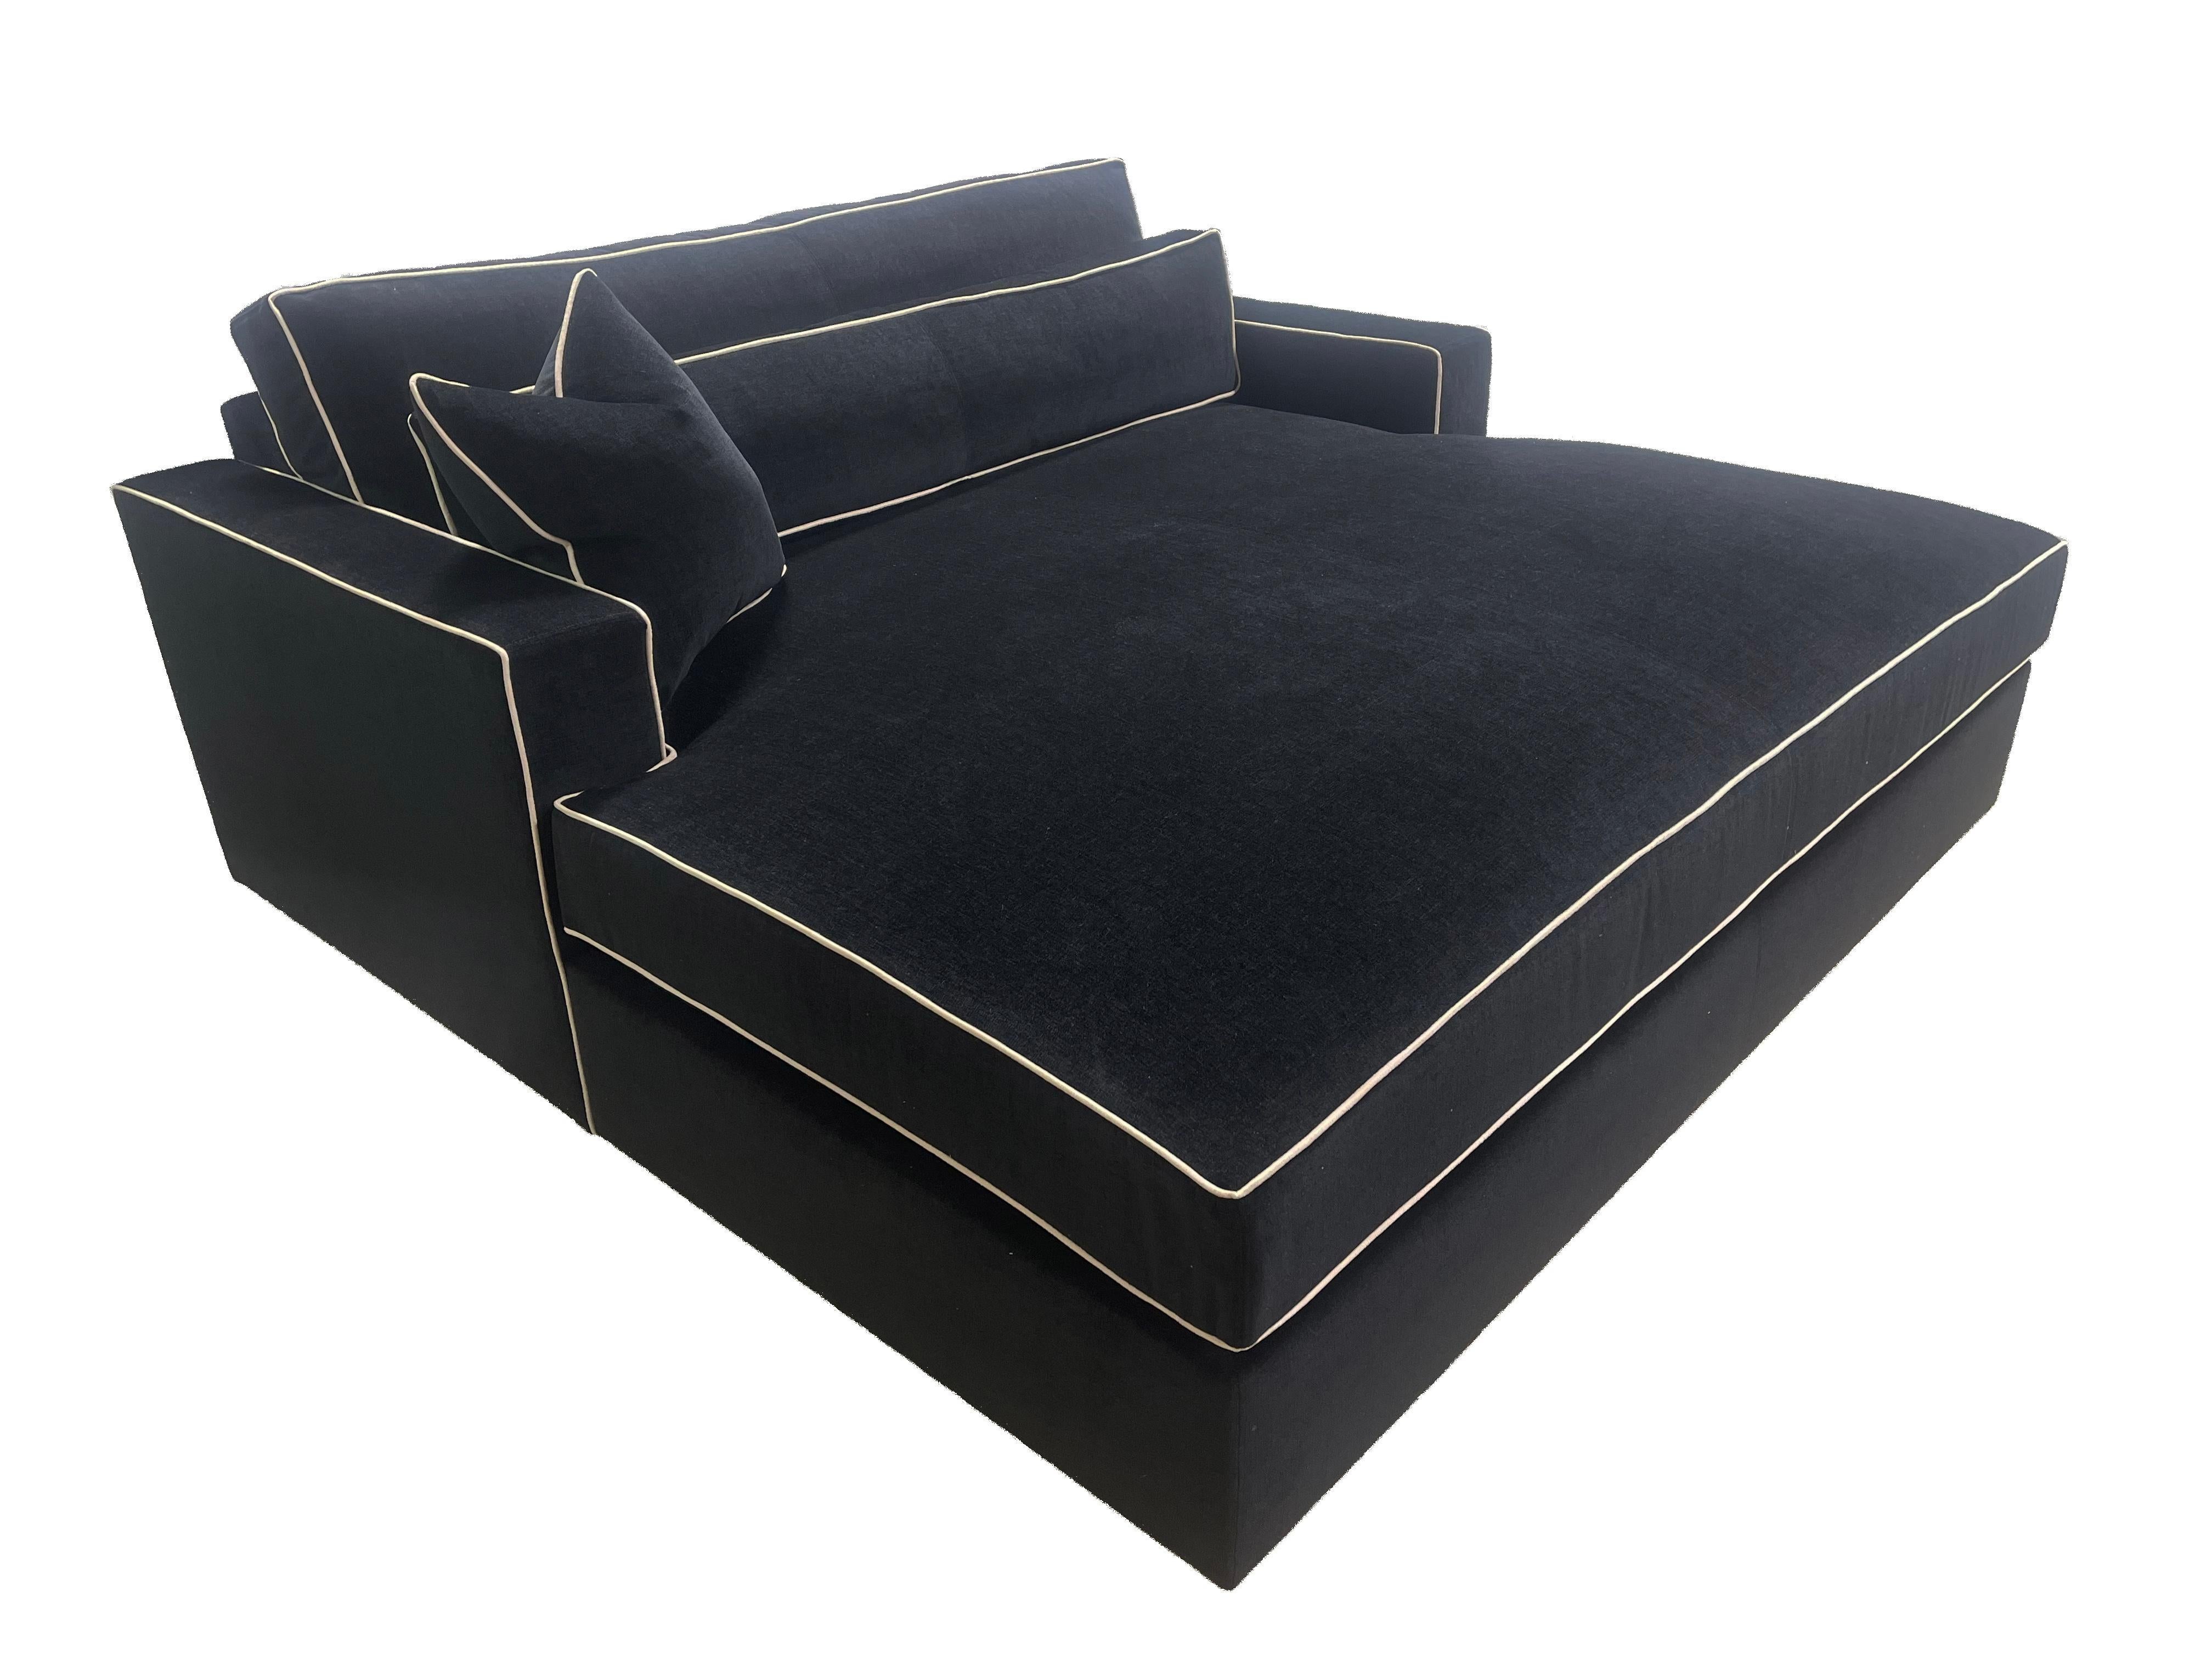 American Model One Daybed For Sale